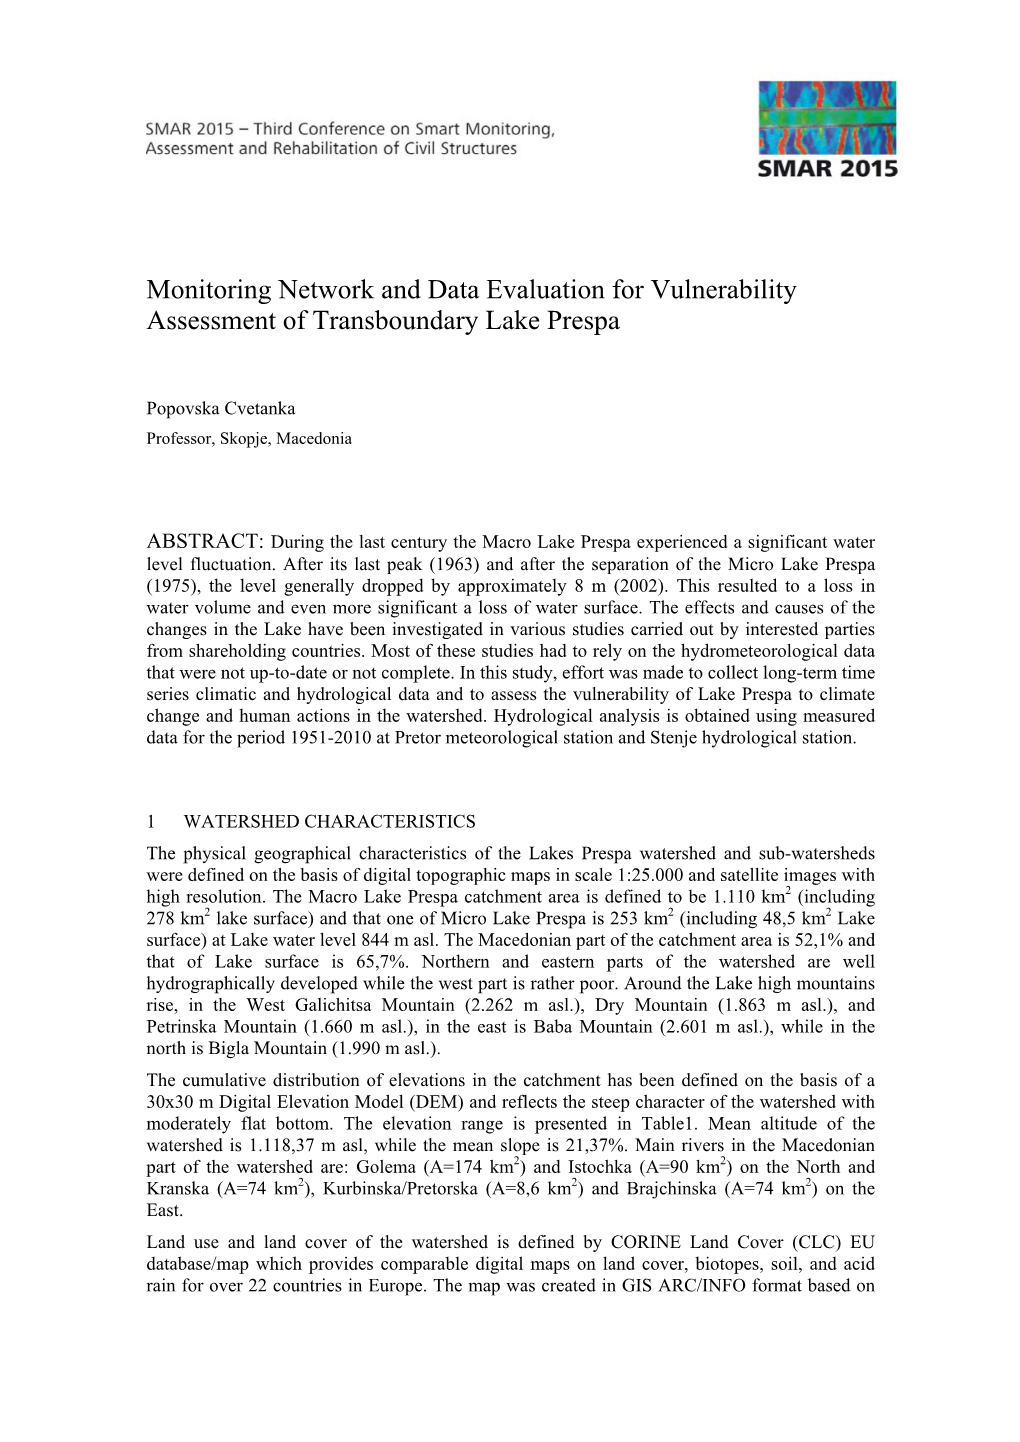 Monitoring Network and Data Evaluation for Vulnerability Assessment of Transboundary Lake Prespa